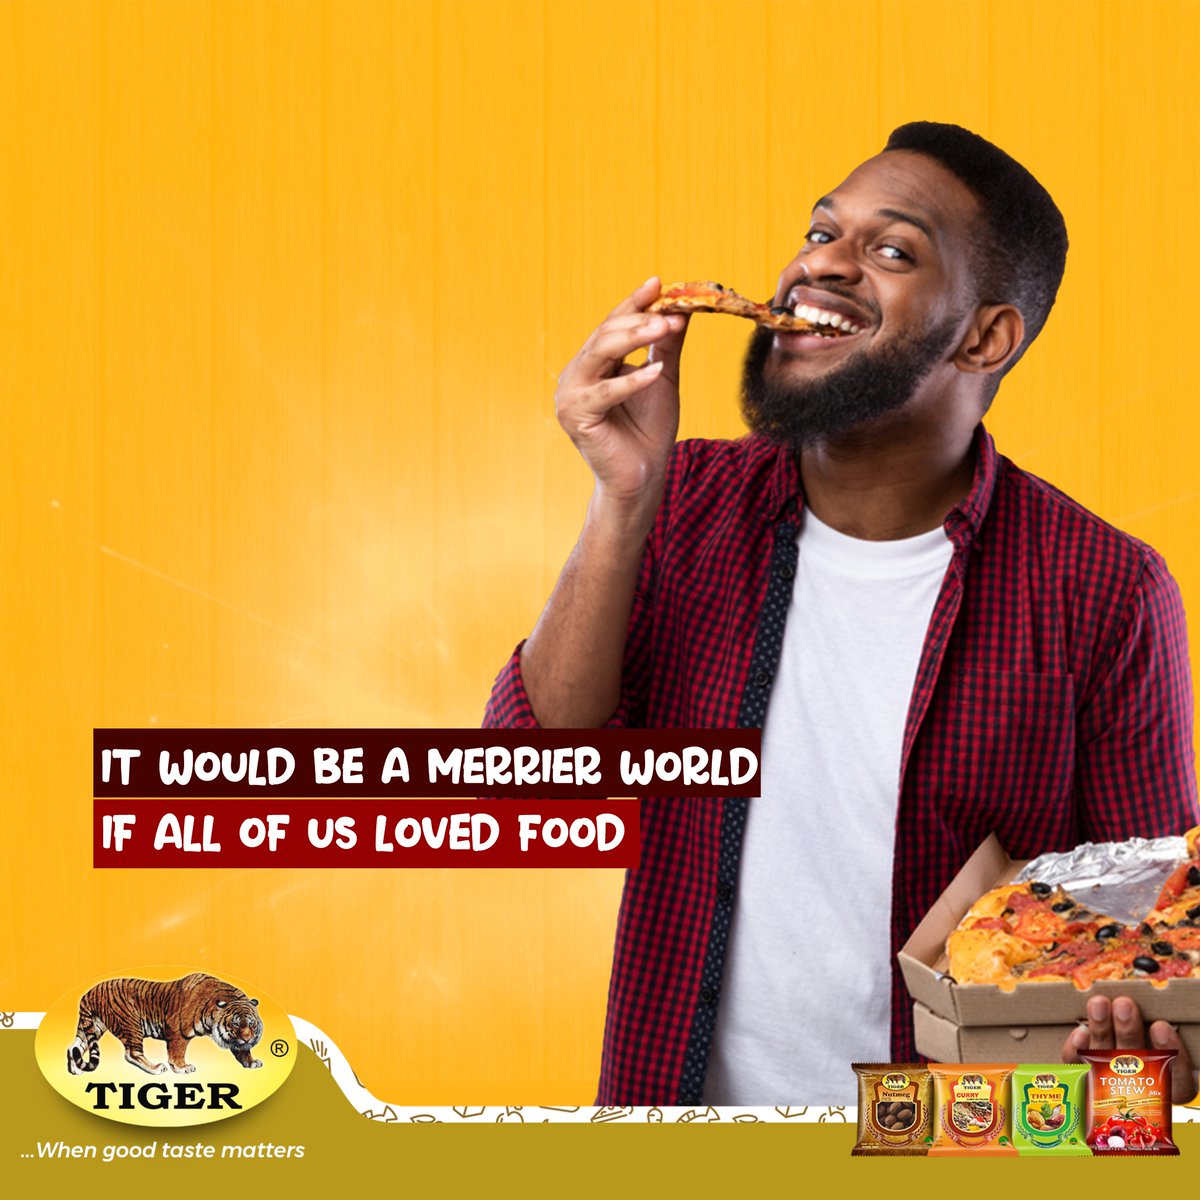 The week's work is done. Fridays are for #fun #groove and #food.
Tonight, we indulge. What are you craving this Friday?

#TGIF #TigerSpices #WhenGoodTasteMatters #Spices #Herbs #HerbsAndSpices #FoodSpices #Food #FoodLover